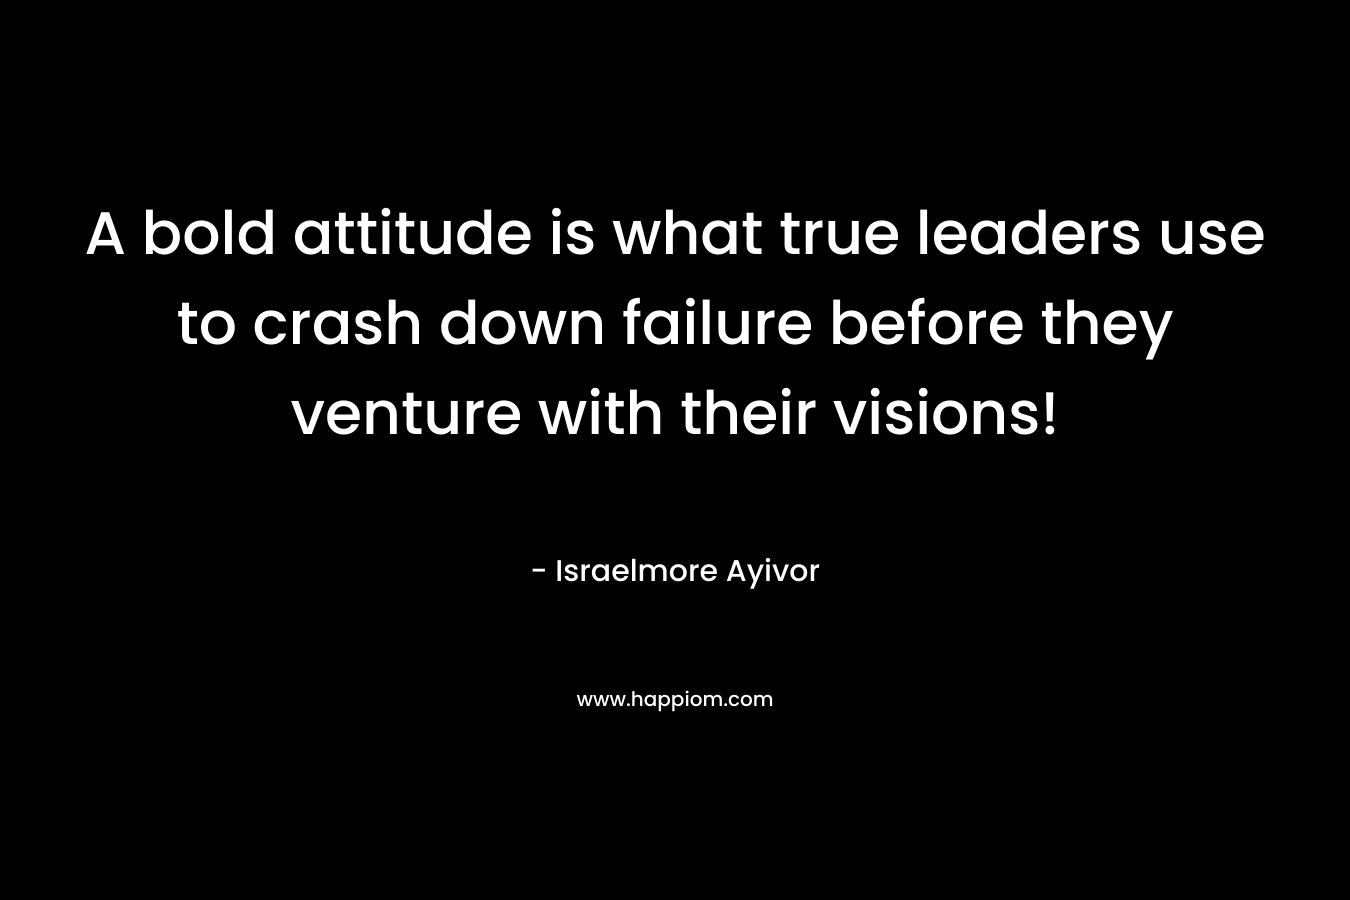 A bold attitude is what true leaders use to crash down failure before they venture with their visions! – Israelmore Ayivor